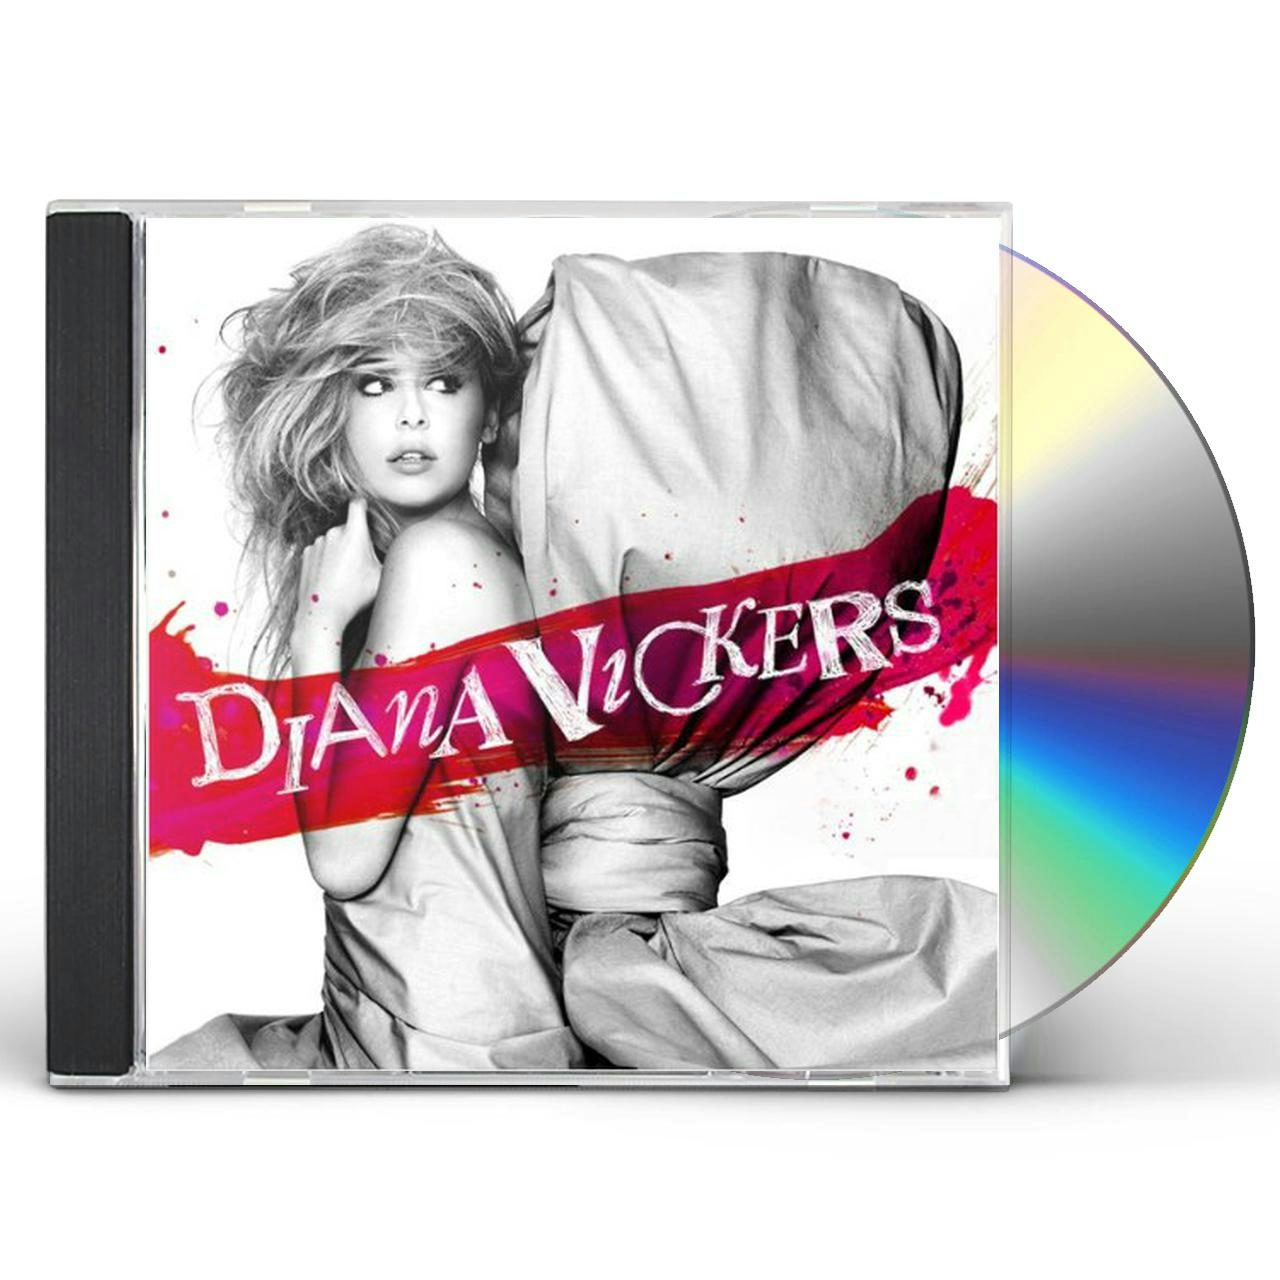 Diana Vickers SONGS FROM THE TAINTED CHERRY CD $11.99$9.99